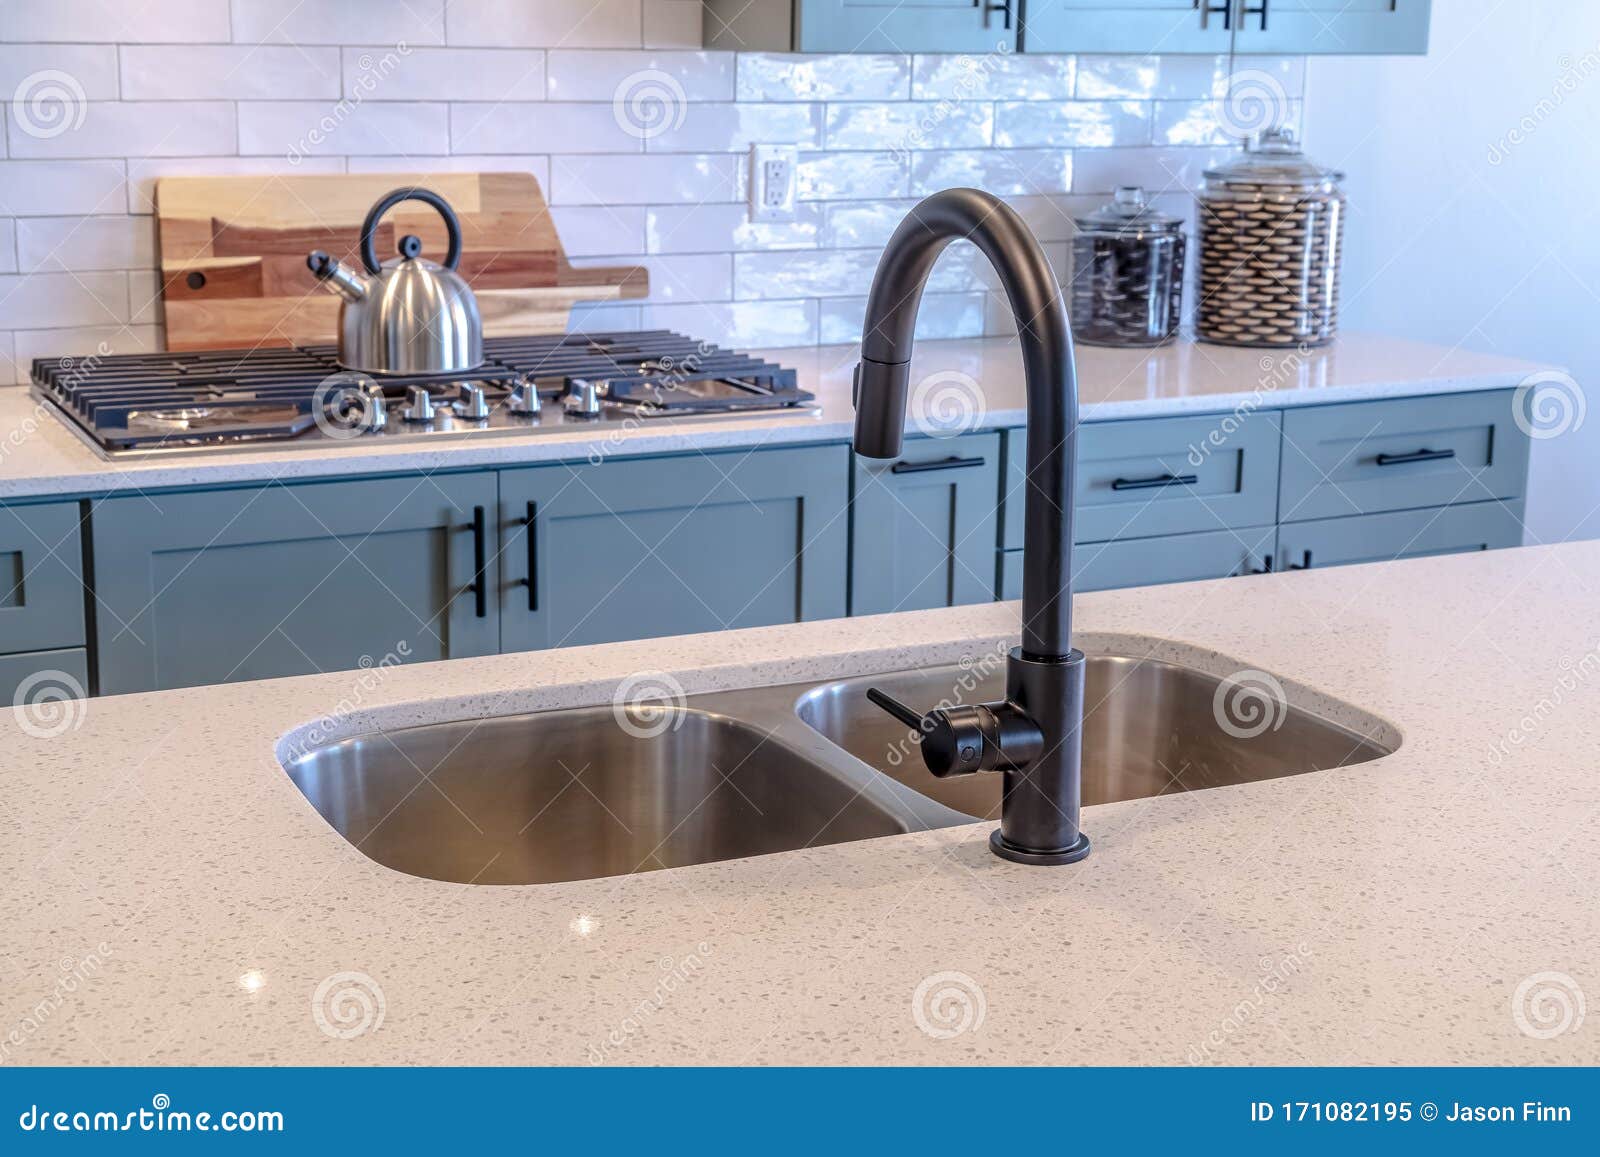 Kitchen Island Double Sink and Black Faucet Against Cooktop and Tile ...